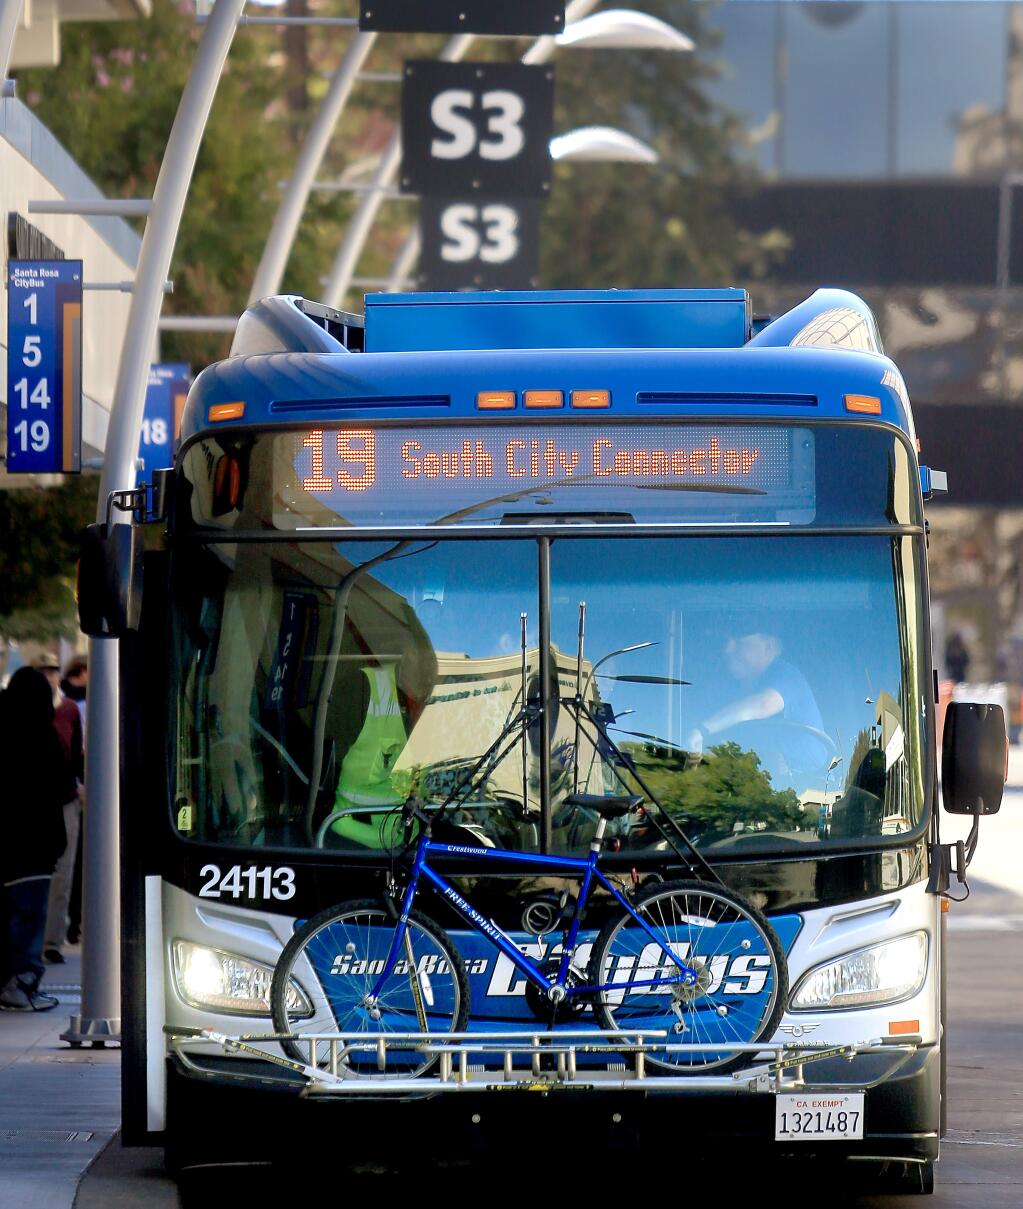 A driver waits for a connector bus to arrive at the Santa Rosa transit mall. The Santa Rosa City Council has approved ad rates for the city's new transit advertising program. (Kent Porter / The Press Democrat, 2017)